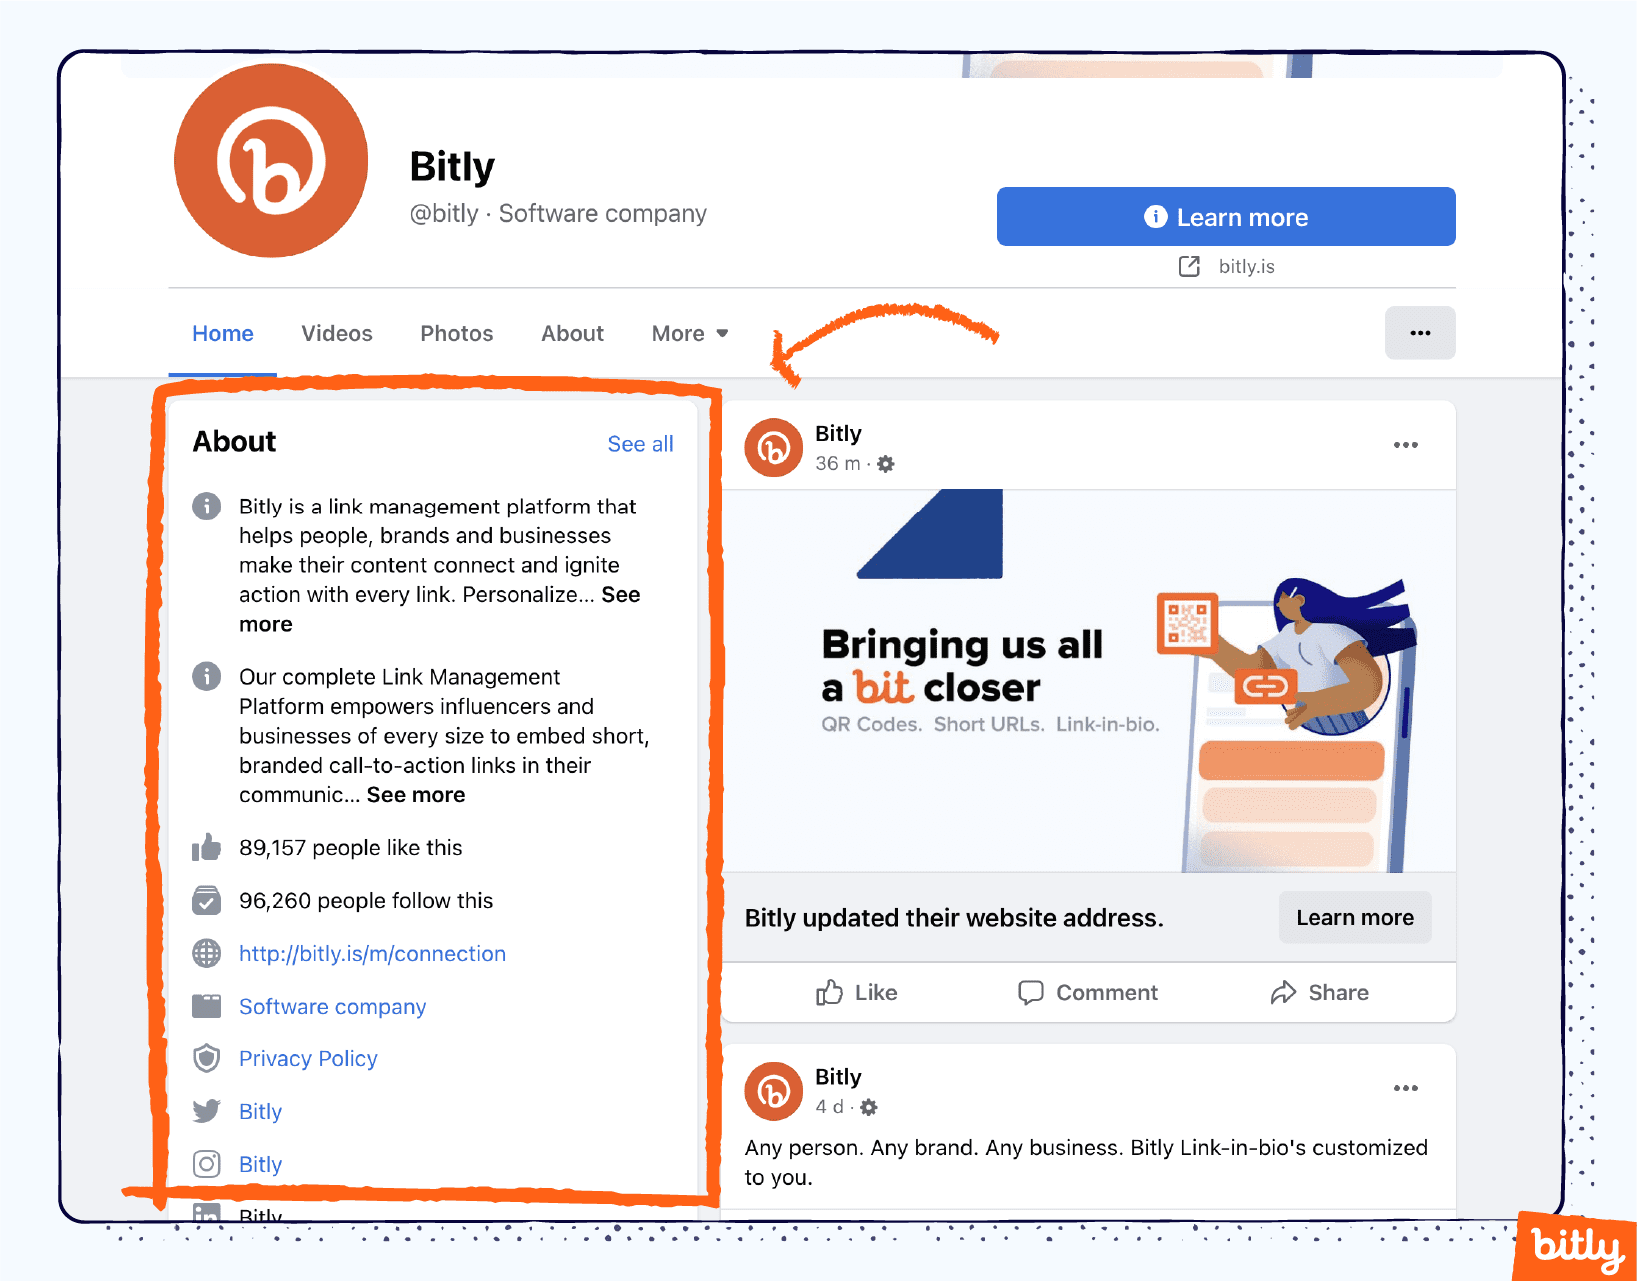 The About section is circled on the Bitly Facebook page showing off a Bitly Link-in-bio.